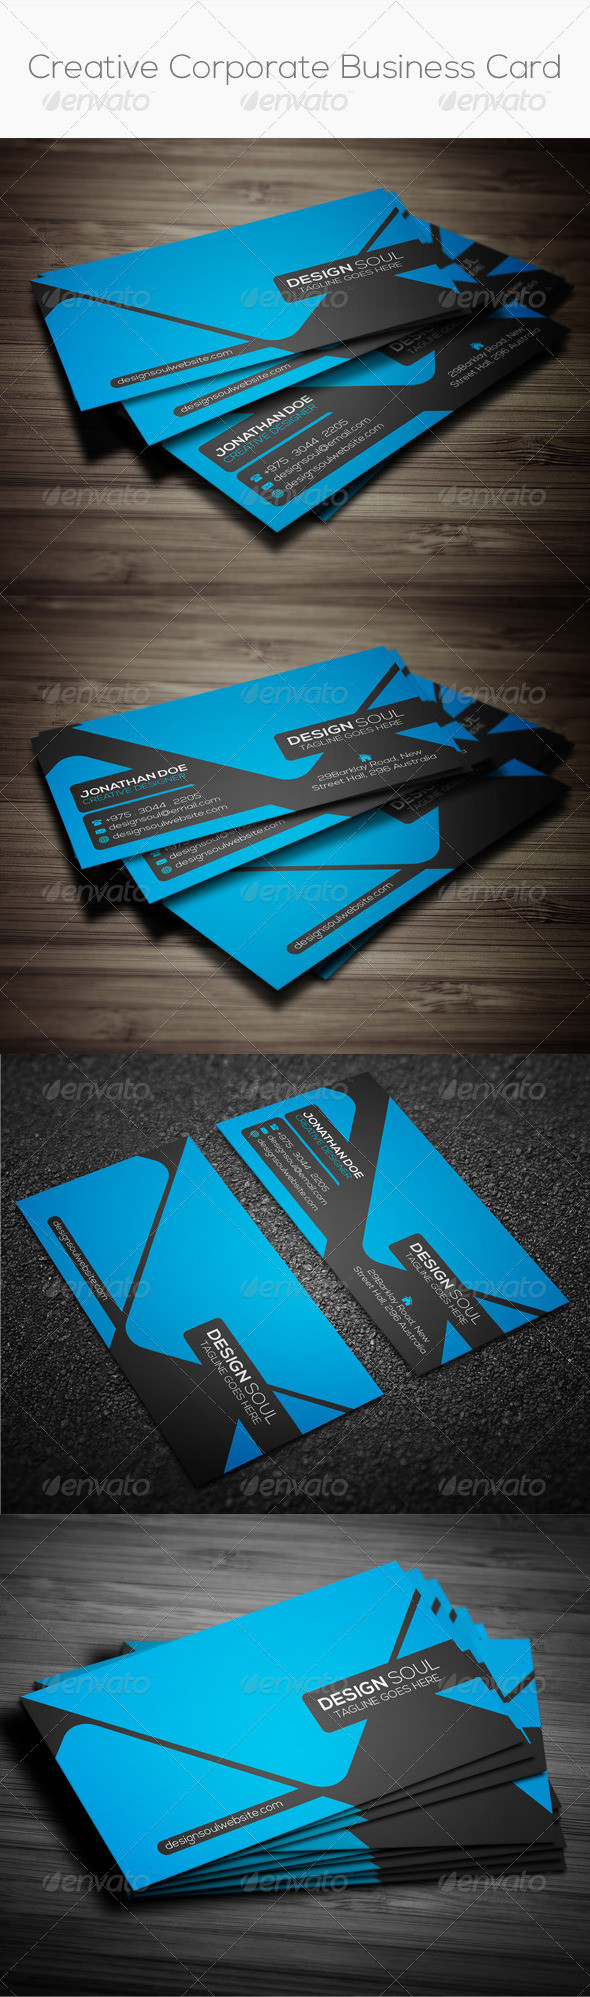 Creative corporate business card preview